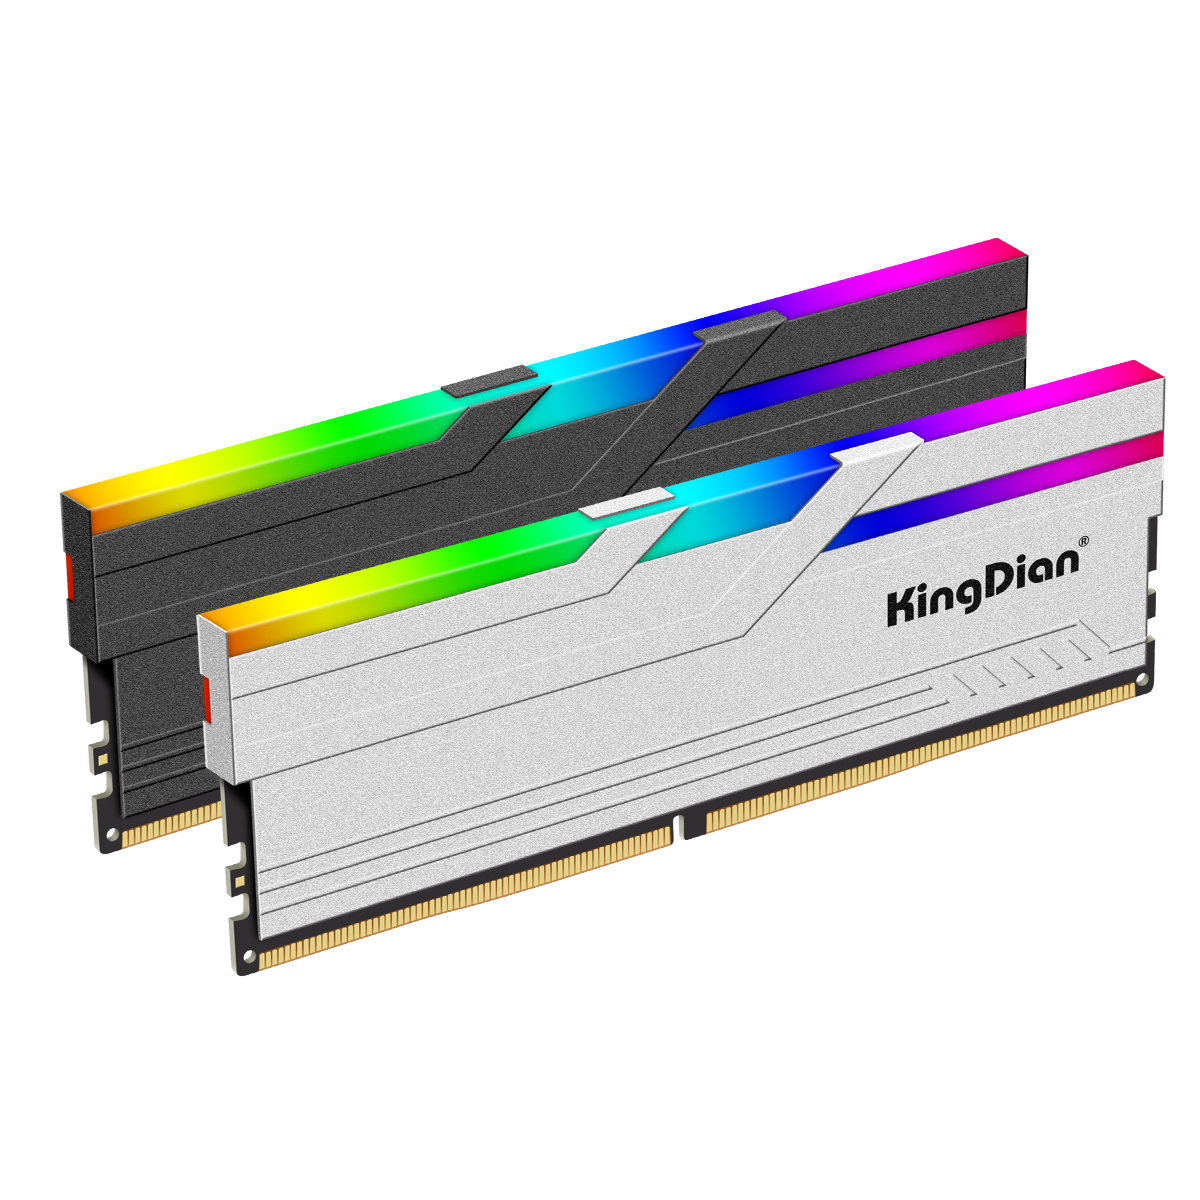 KingDian DDR5 UDIMM RGB Series RH51 - Better Upgrade Memory for Gaming and High-Performance PCs